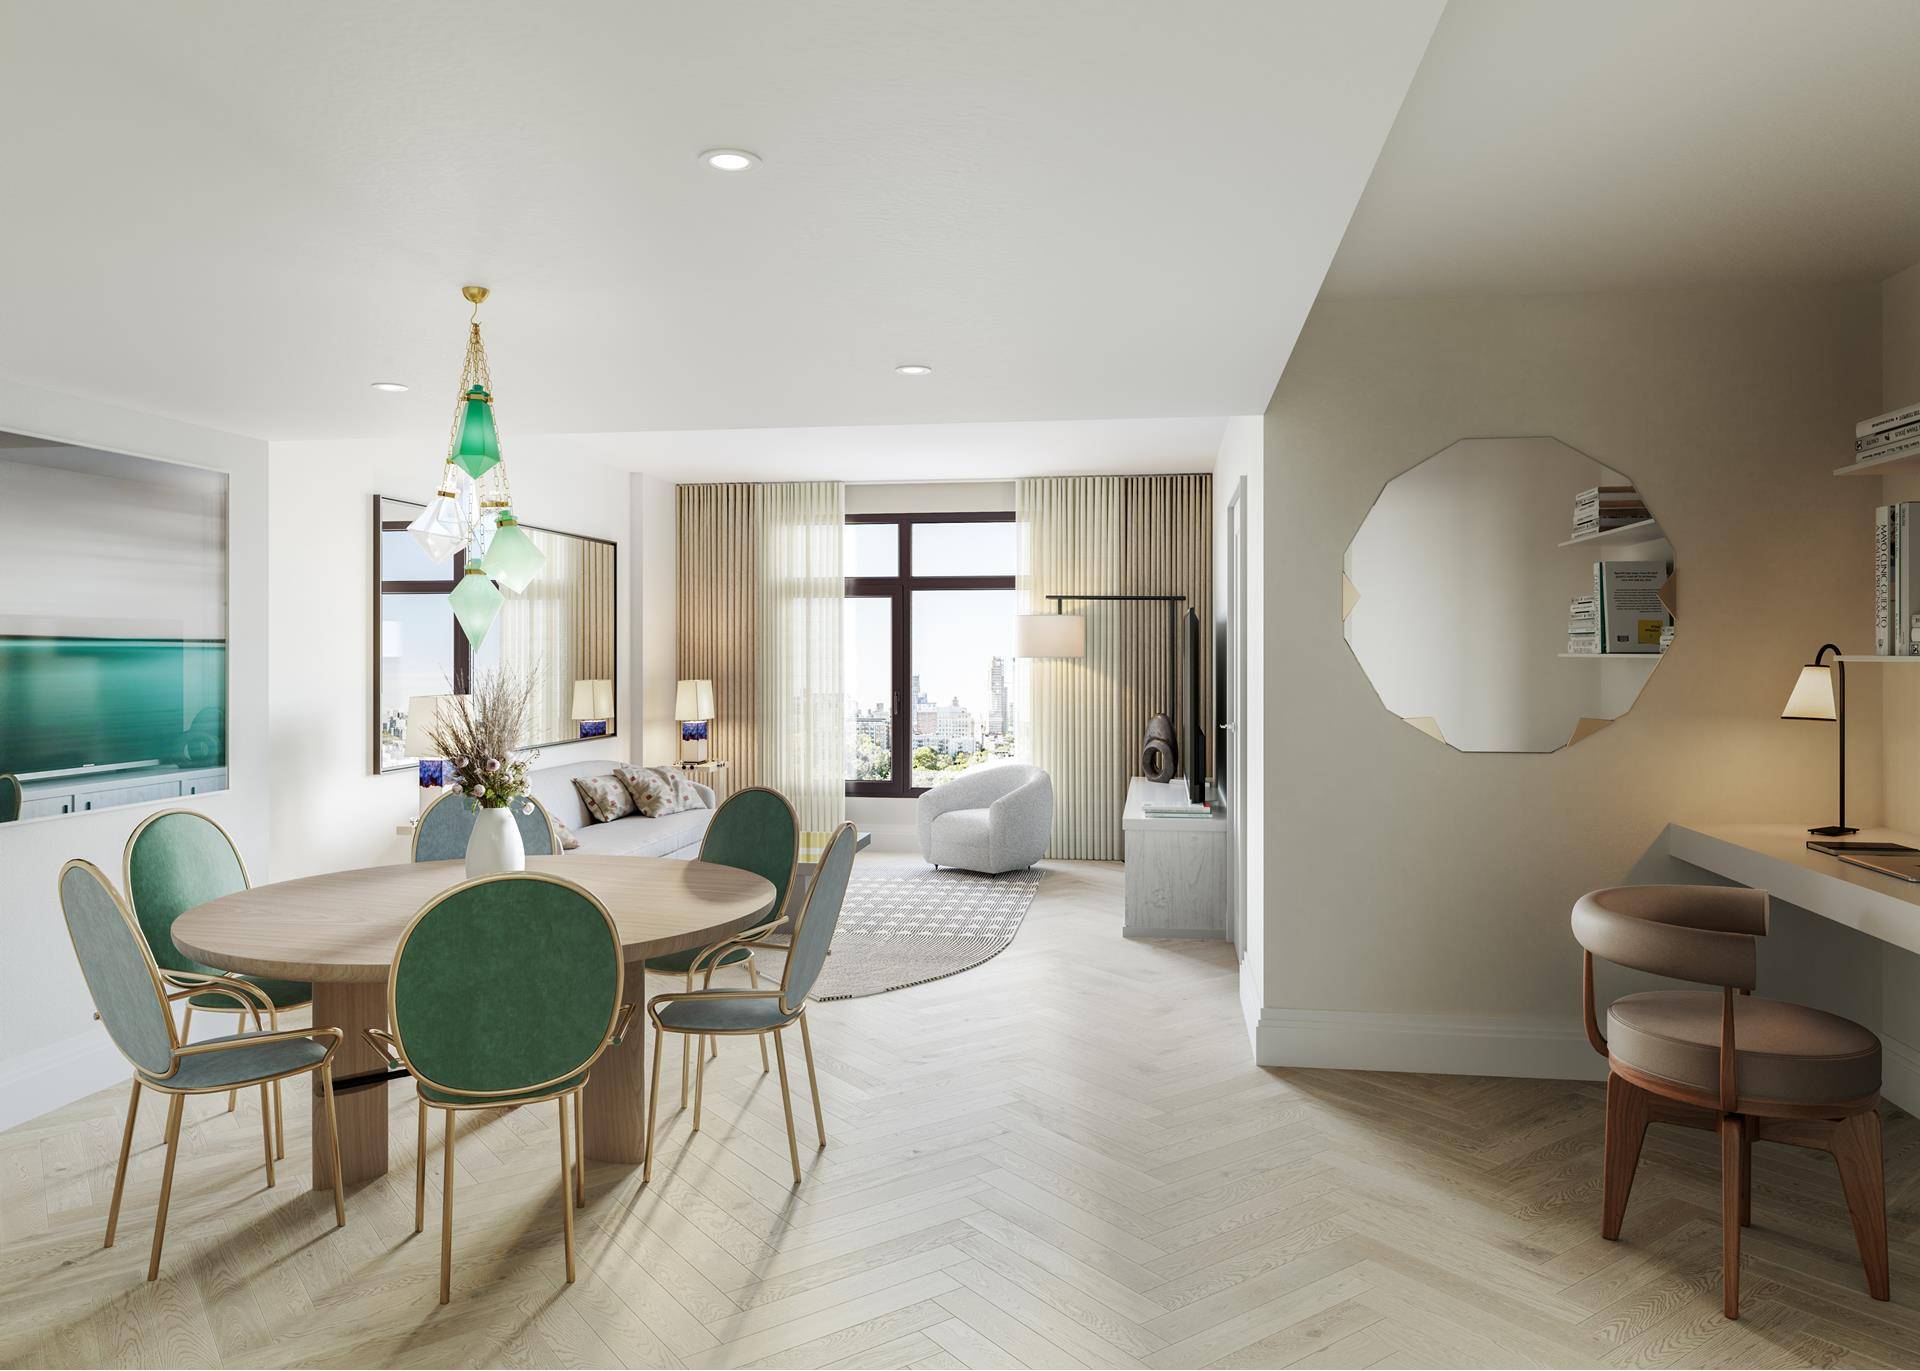 Sales Gallery Now Open By Appointment Introducing residence 6P at 300 West, a northwestern facing studio offering an open concept living area that boasts custom White Oak herringbone flooring, central ...